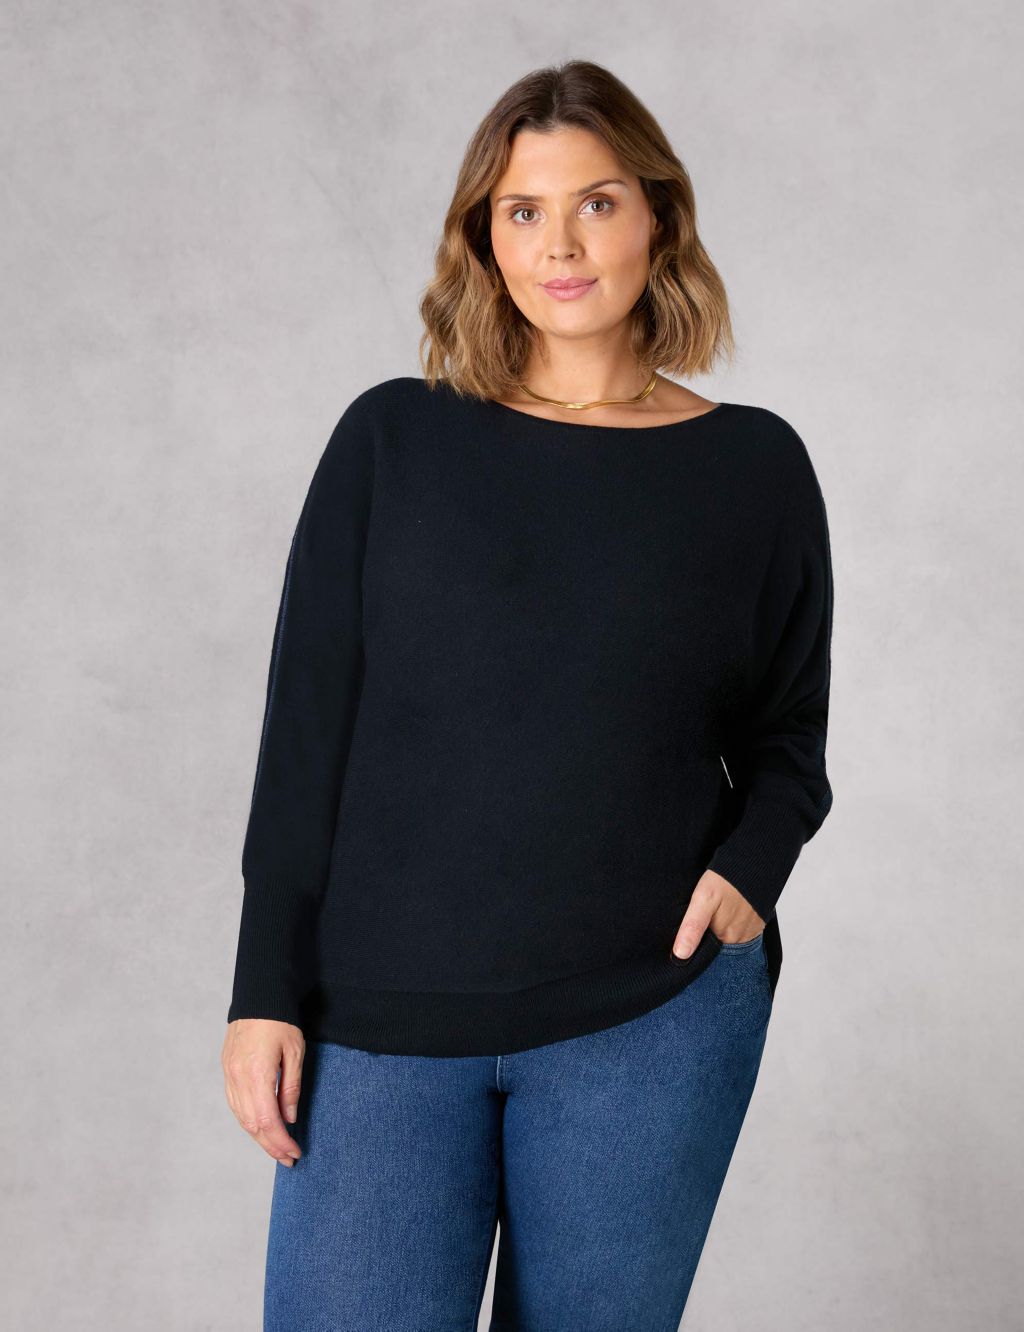 Cotton Blend Relaxed Jumper image 1